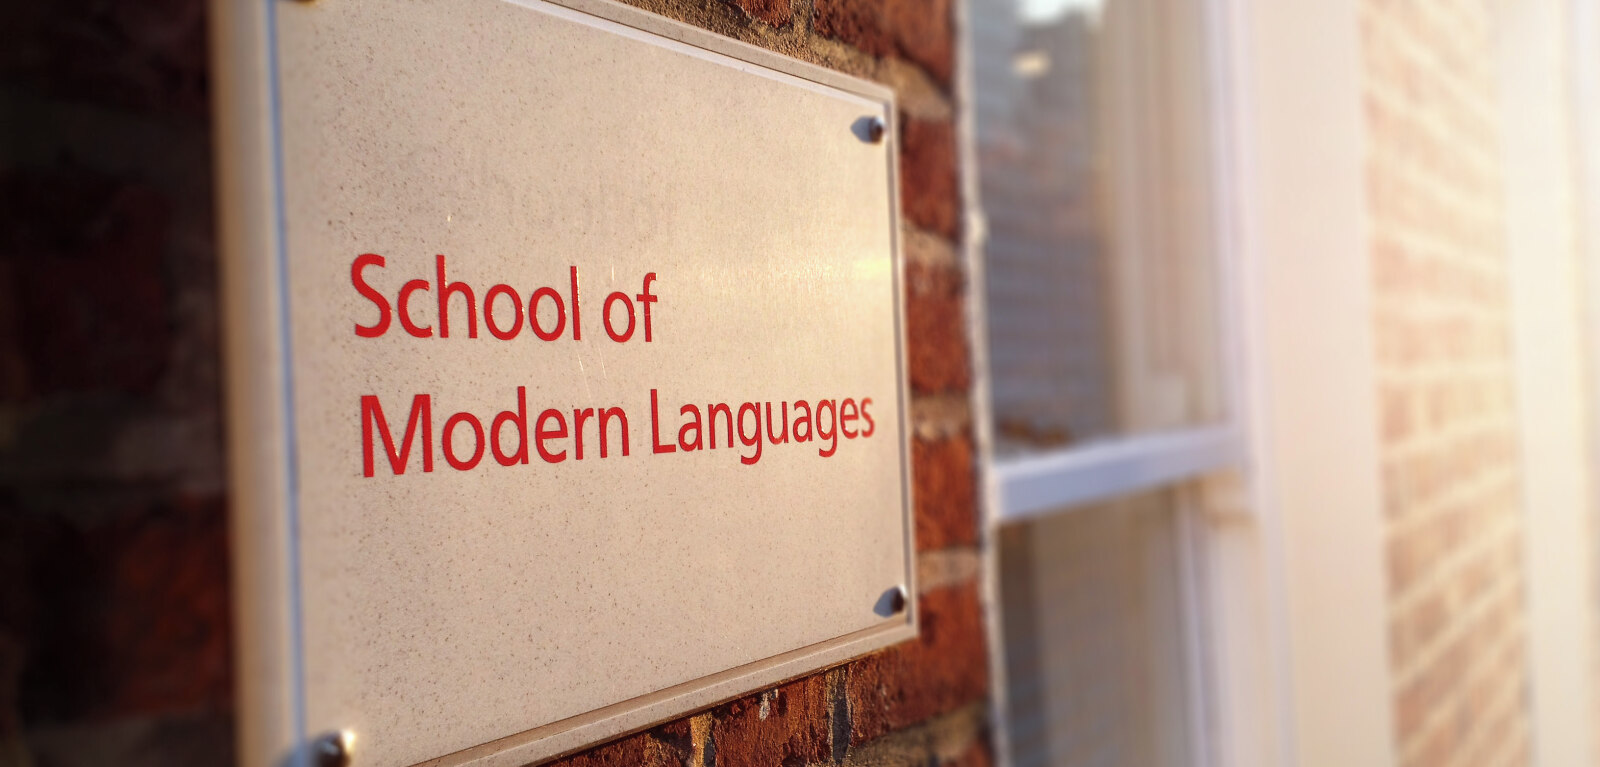 School of Modern Languages sign